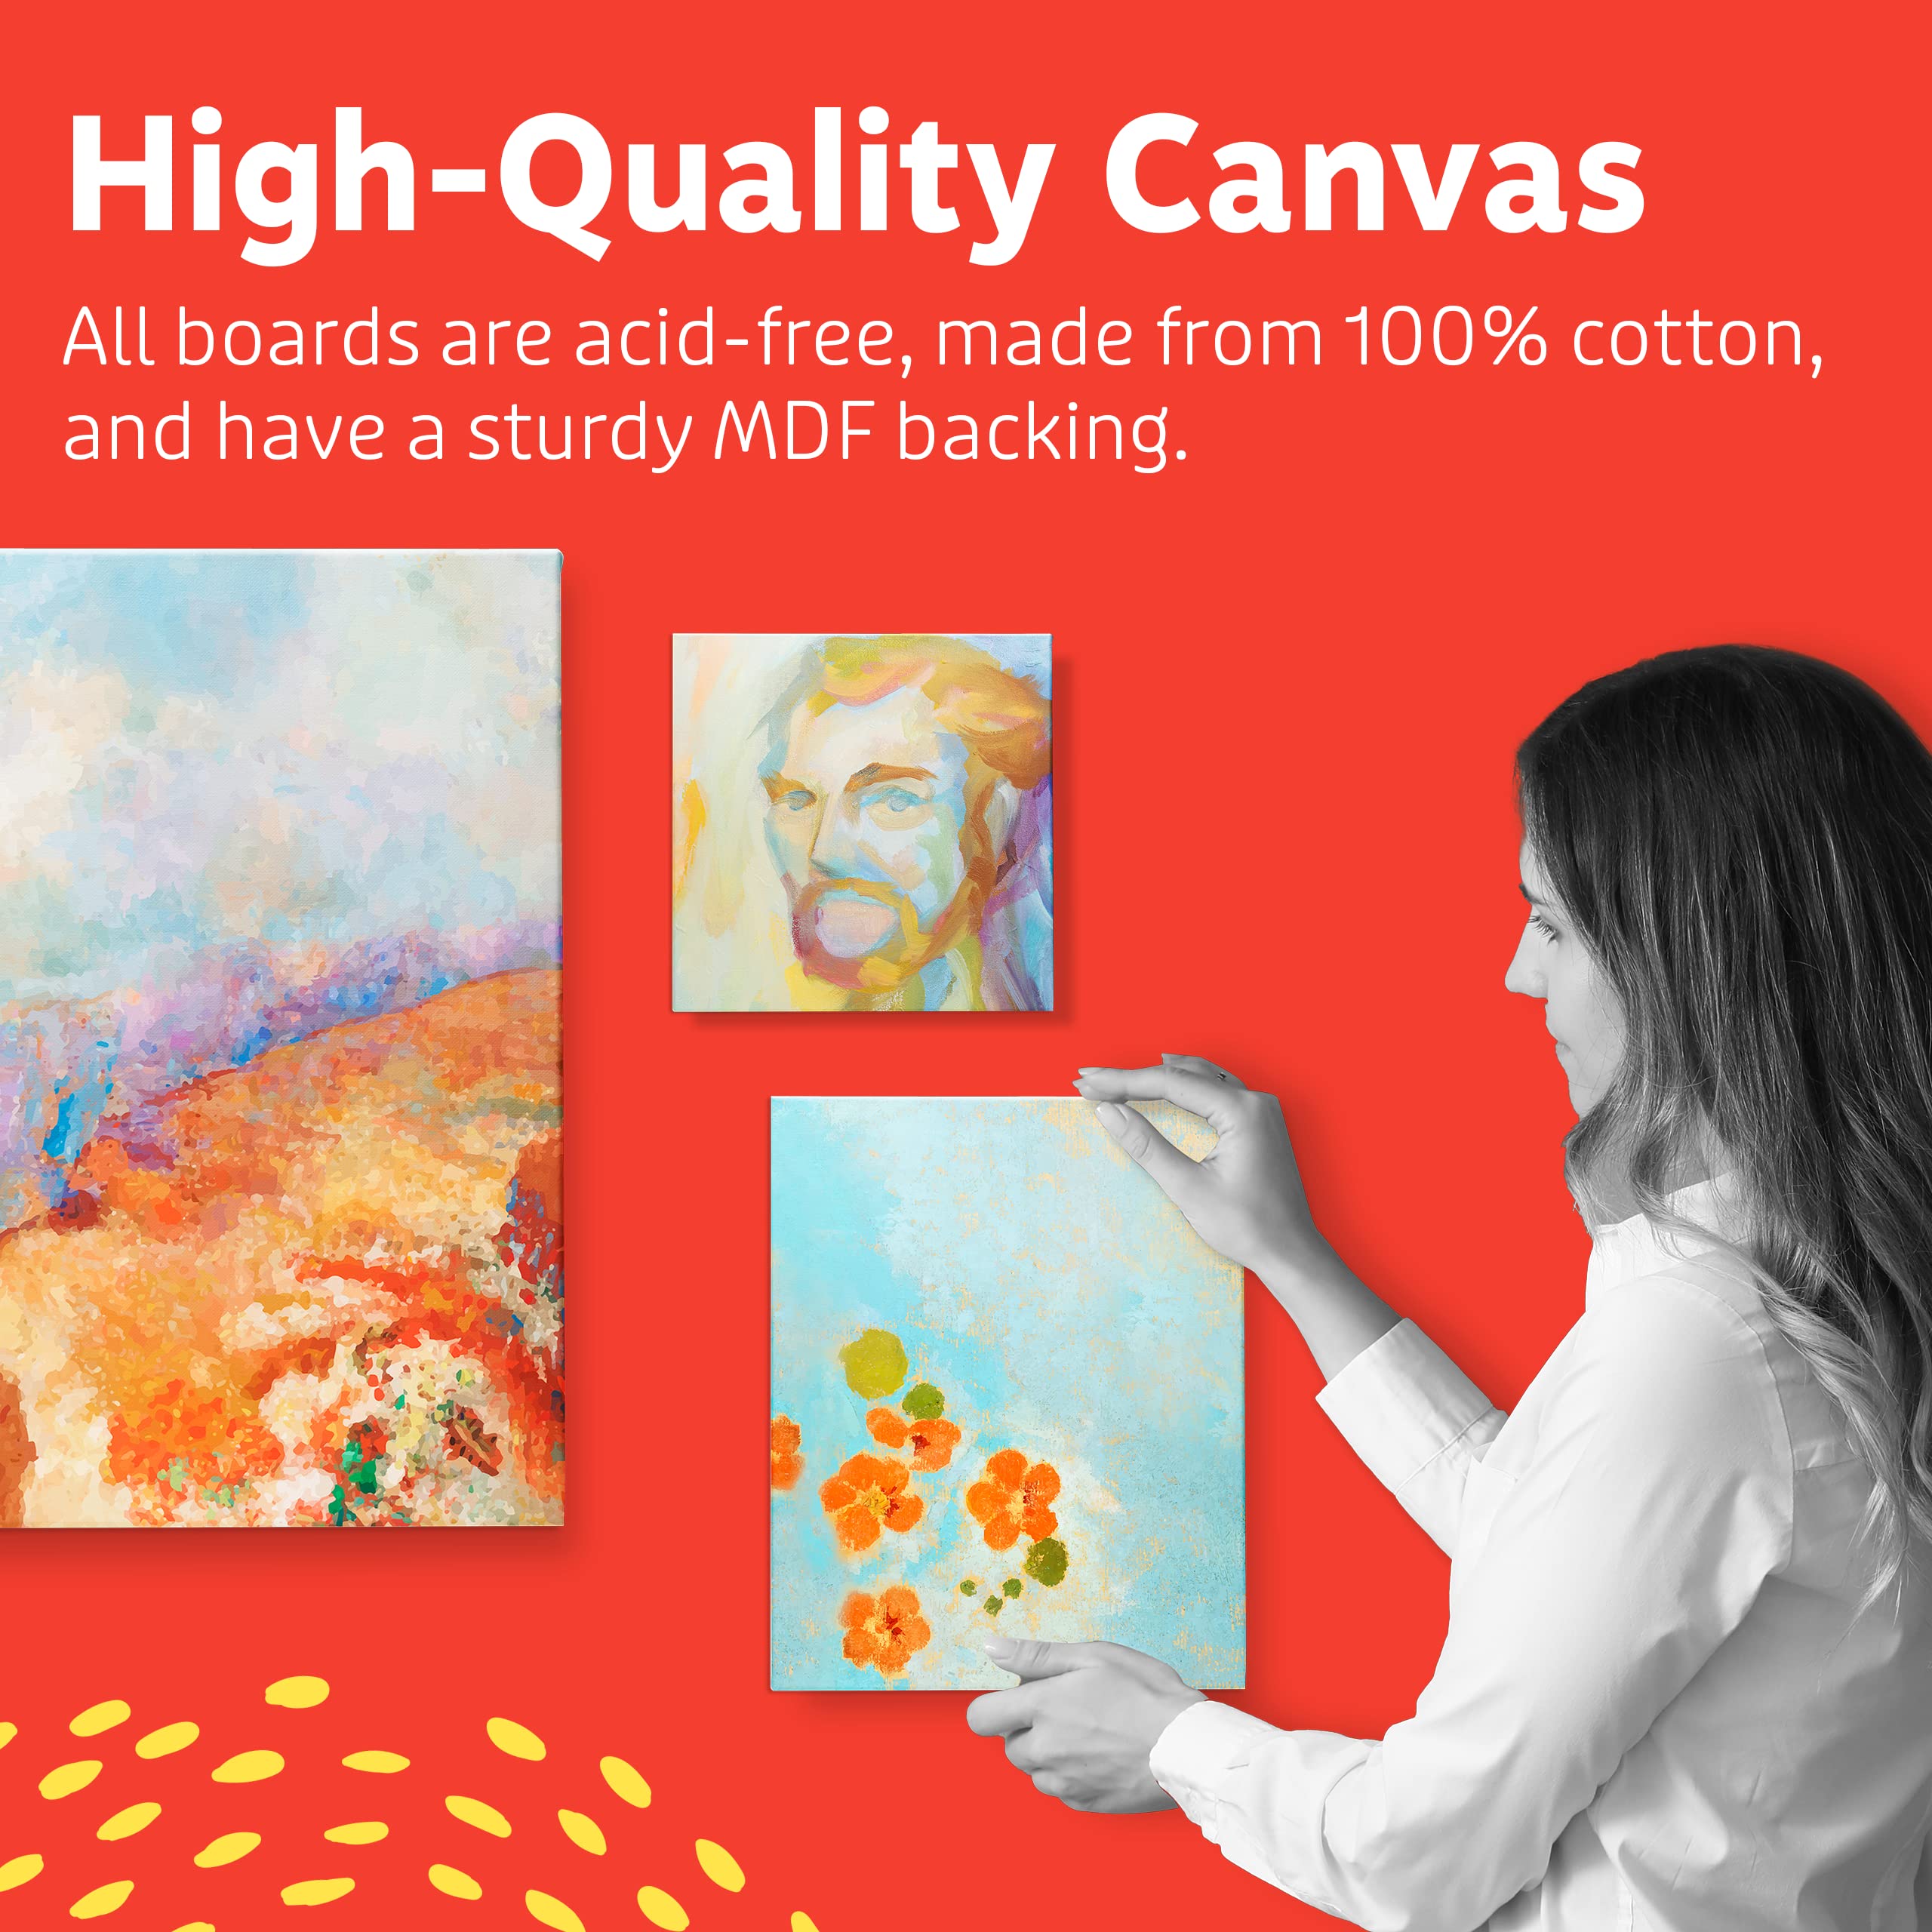 Artlicious Canvases for Painting - Pack of 12, 8 x 10 Inch Blank White Canvas Boards - 100% Cotton Art Panels for Oil, Acrylic & Watercolor Paint